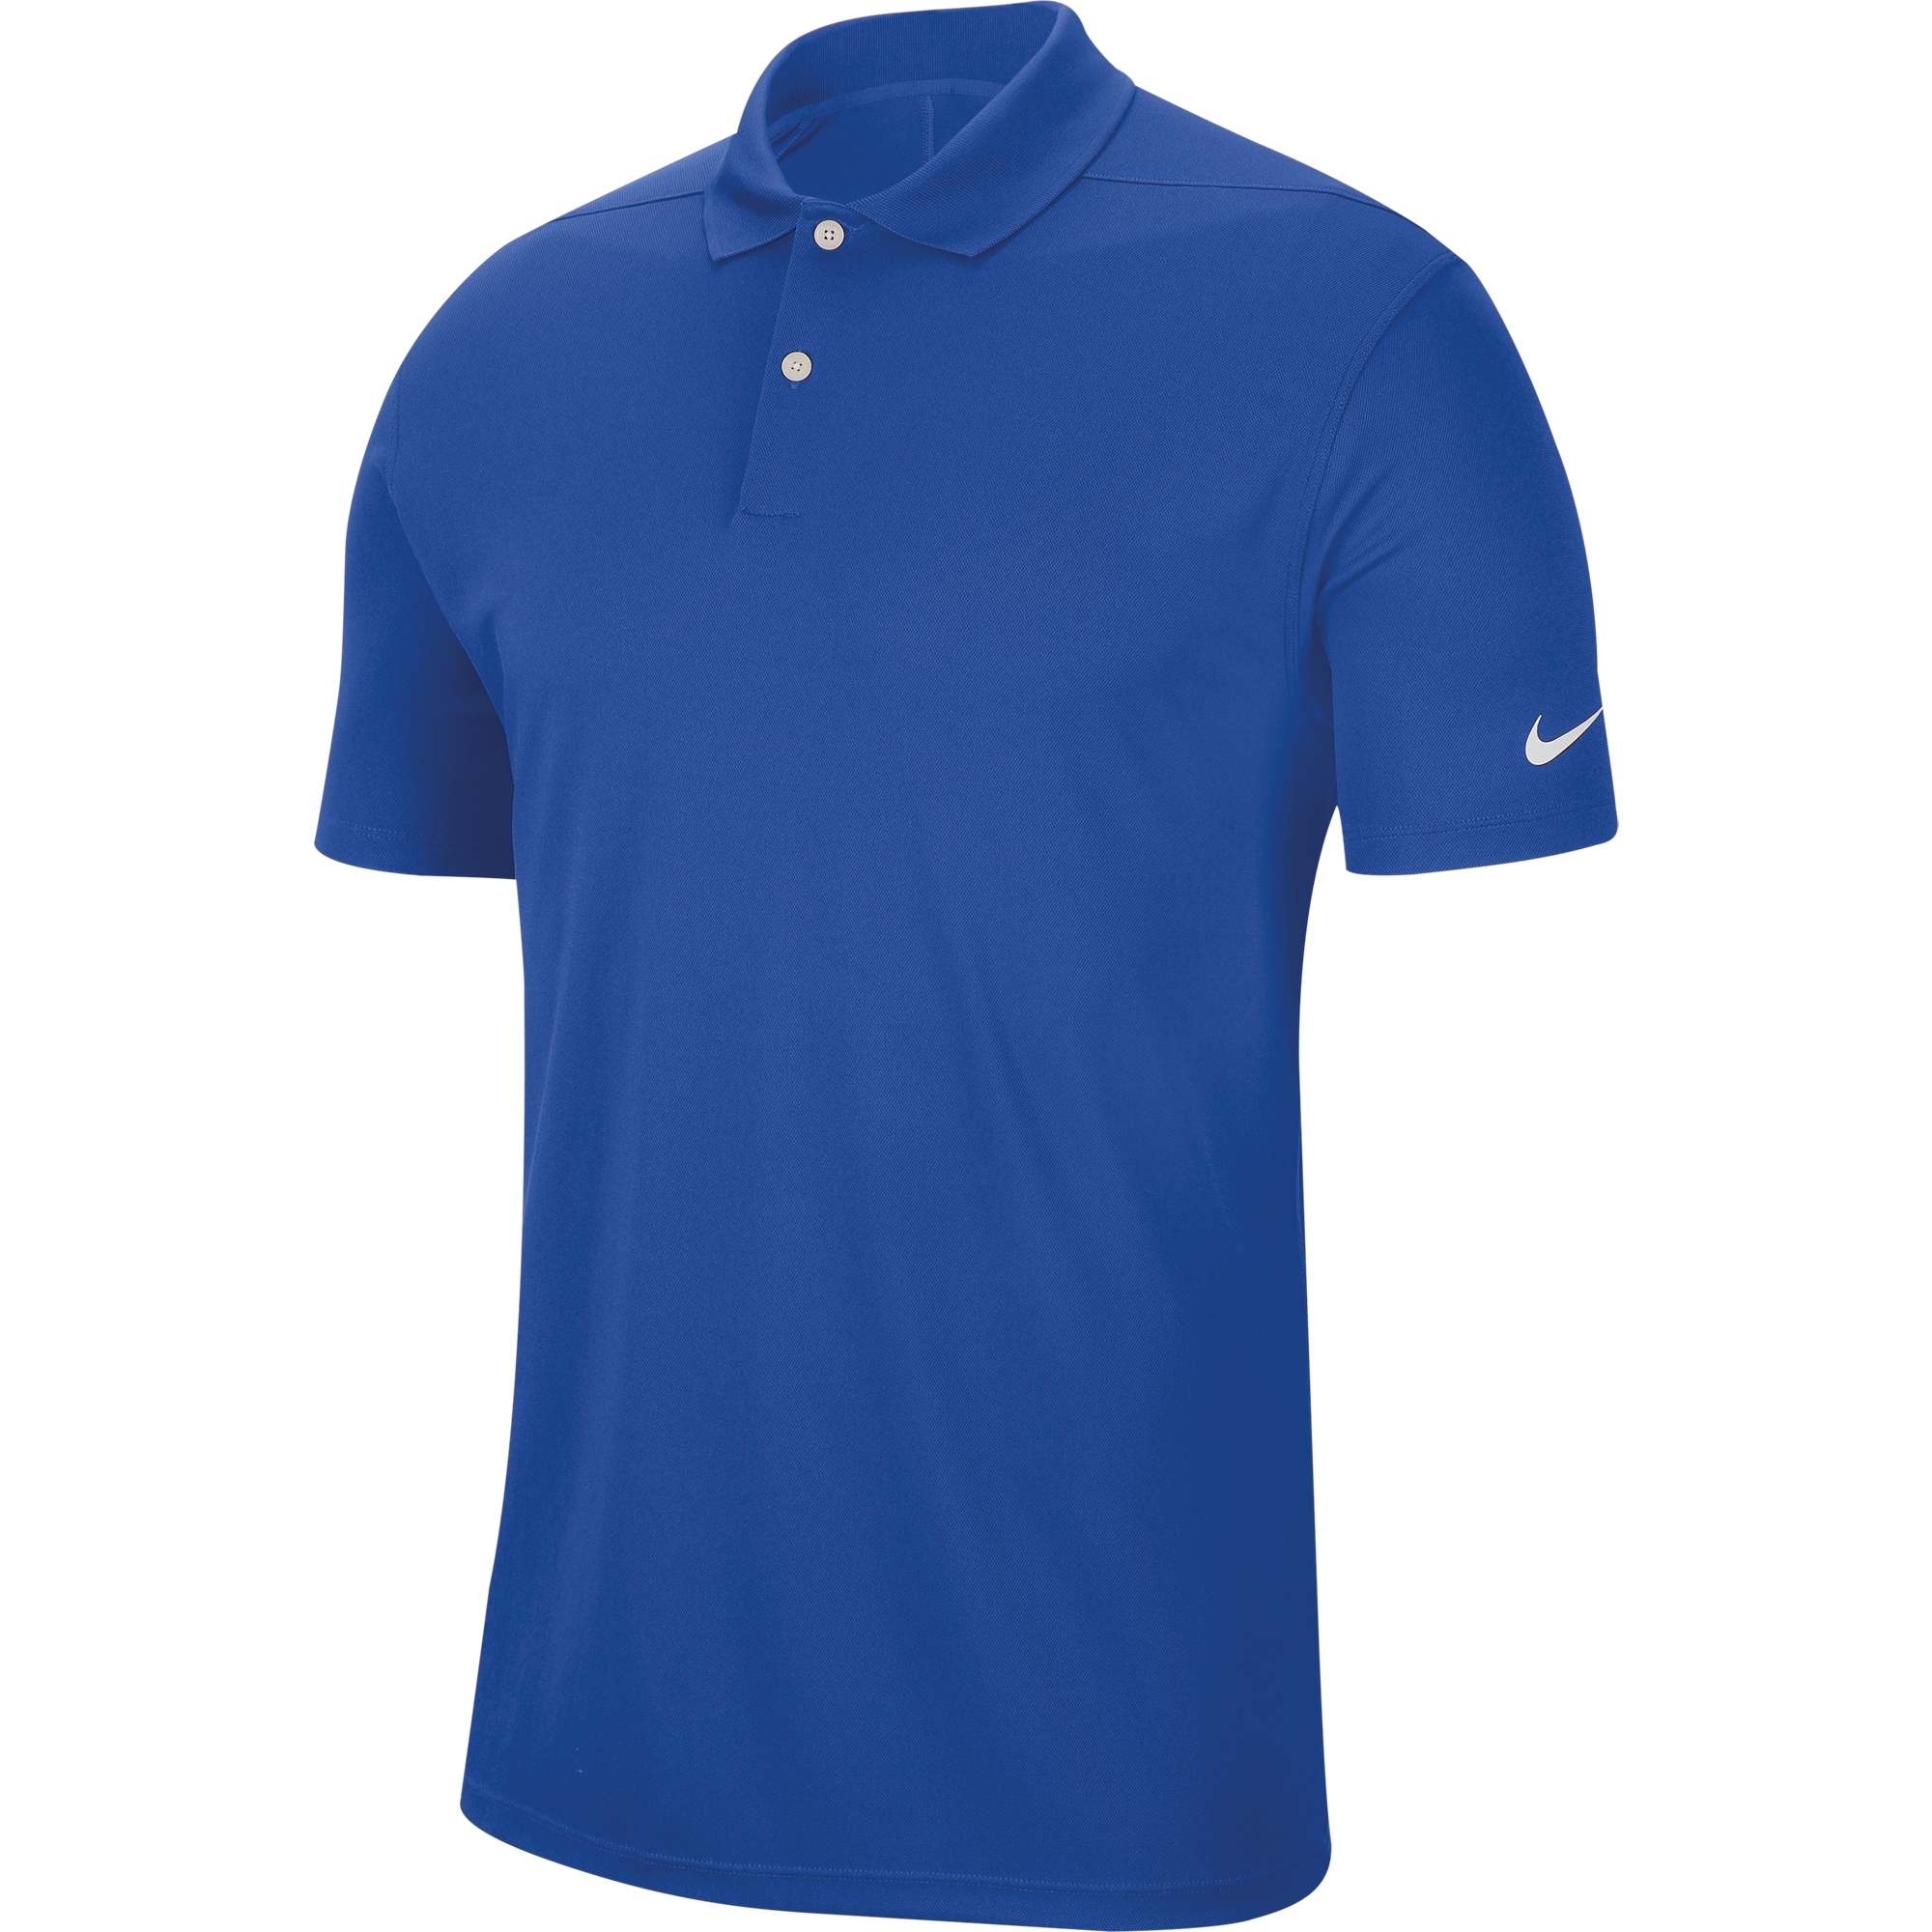 Nike Mens Dry Fit Solid Victory Golf Polo Shirt S- Chest 35-37.5'